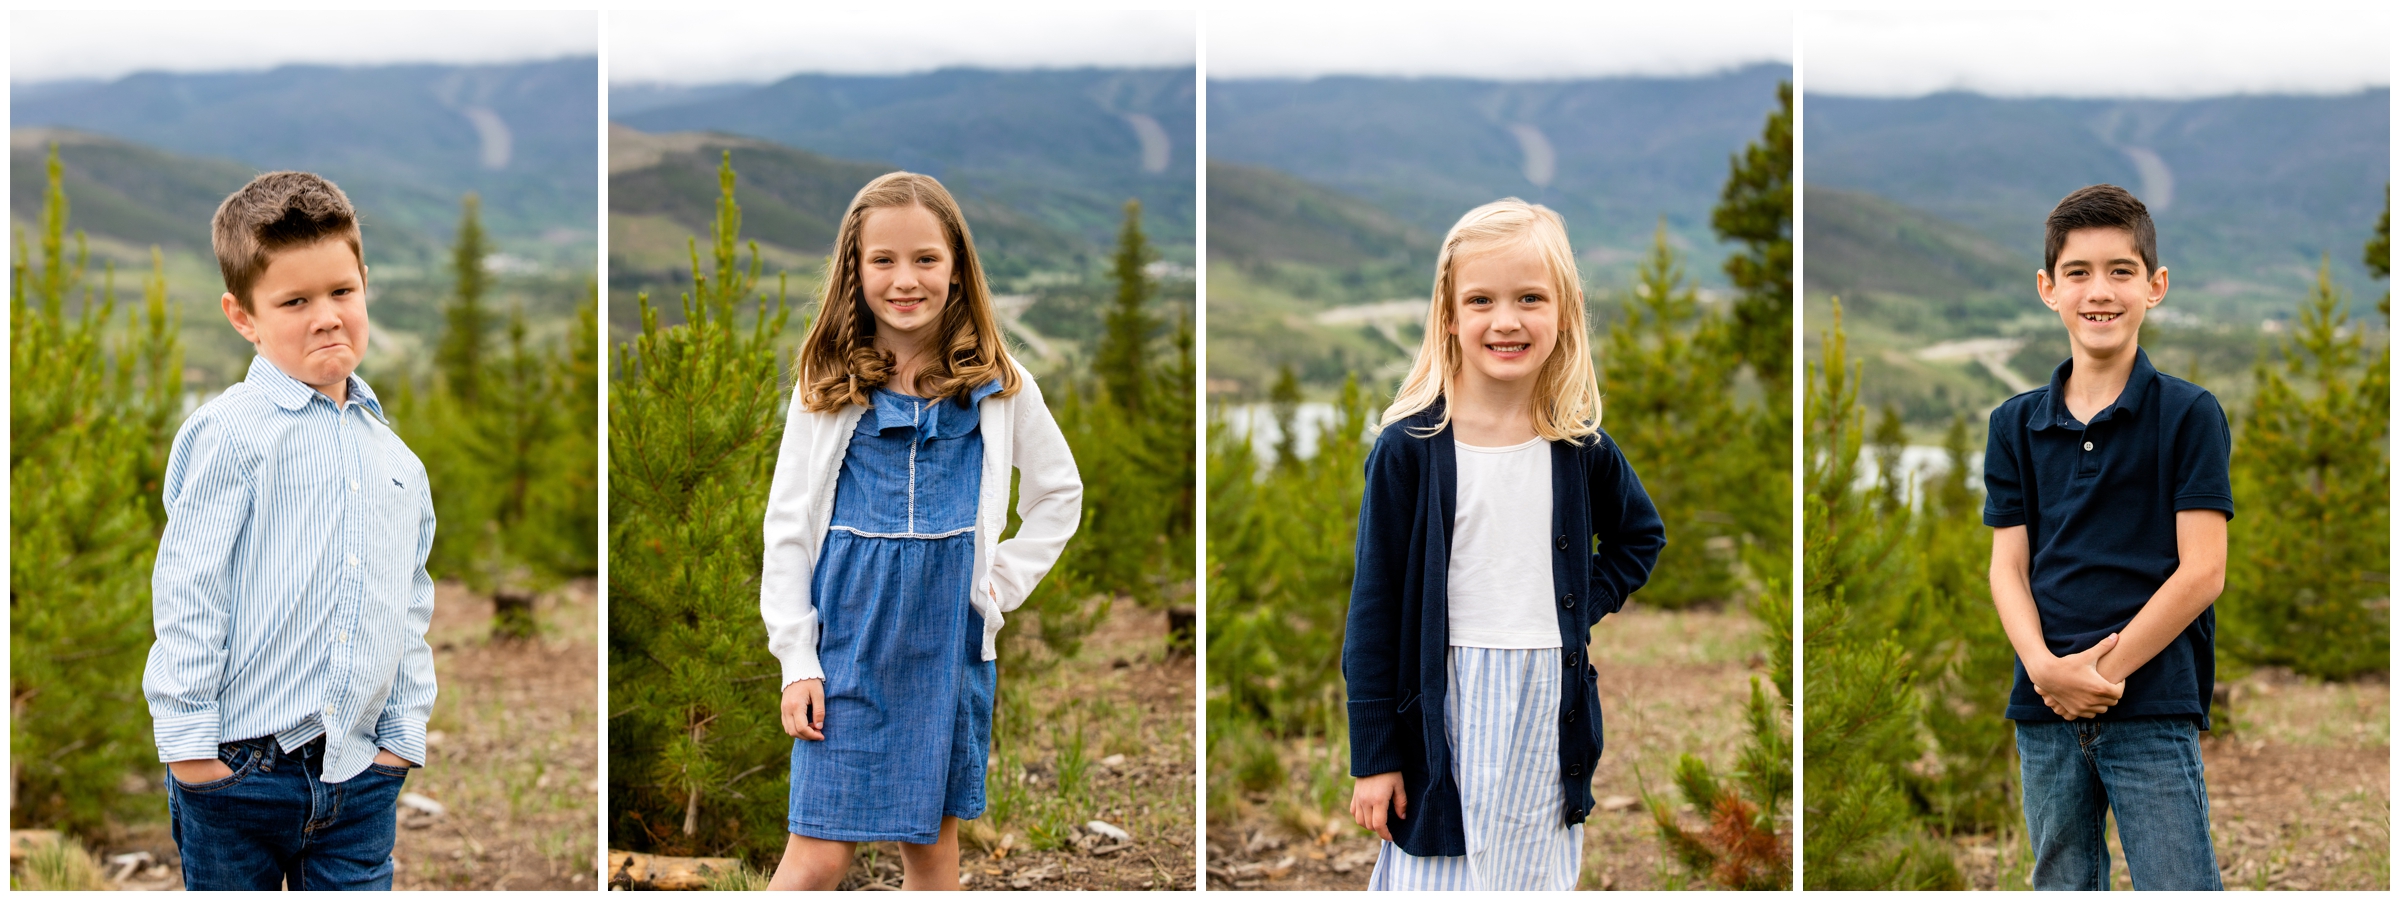 sapphire point mountain pictures by colorado child photographer Plum Pretty Photo